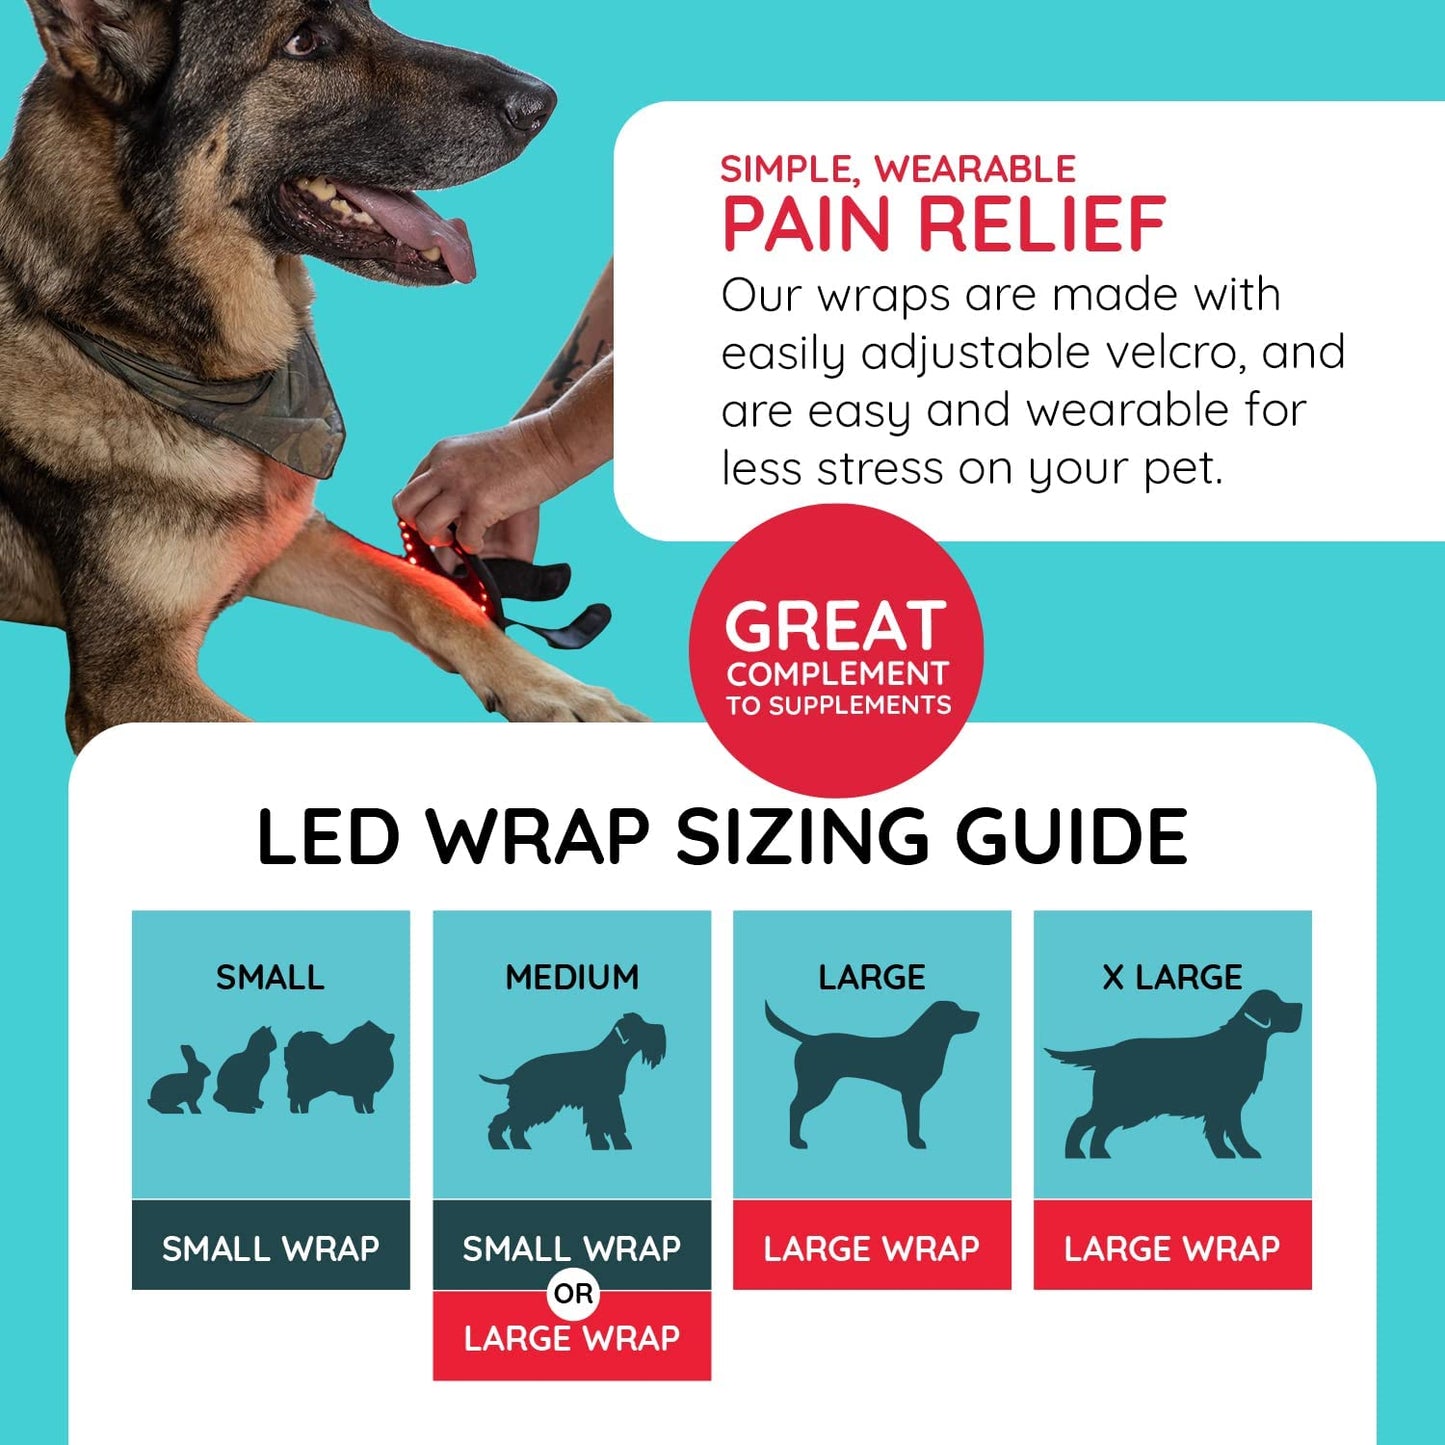 HeaLED wraps are easy to use wearables for your pet